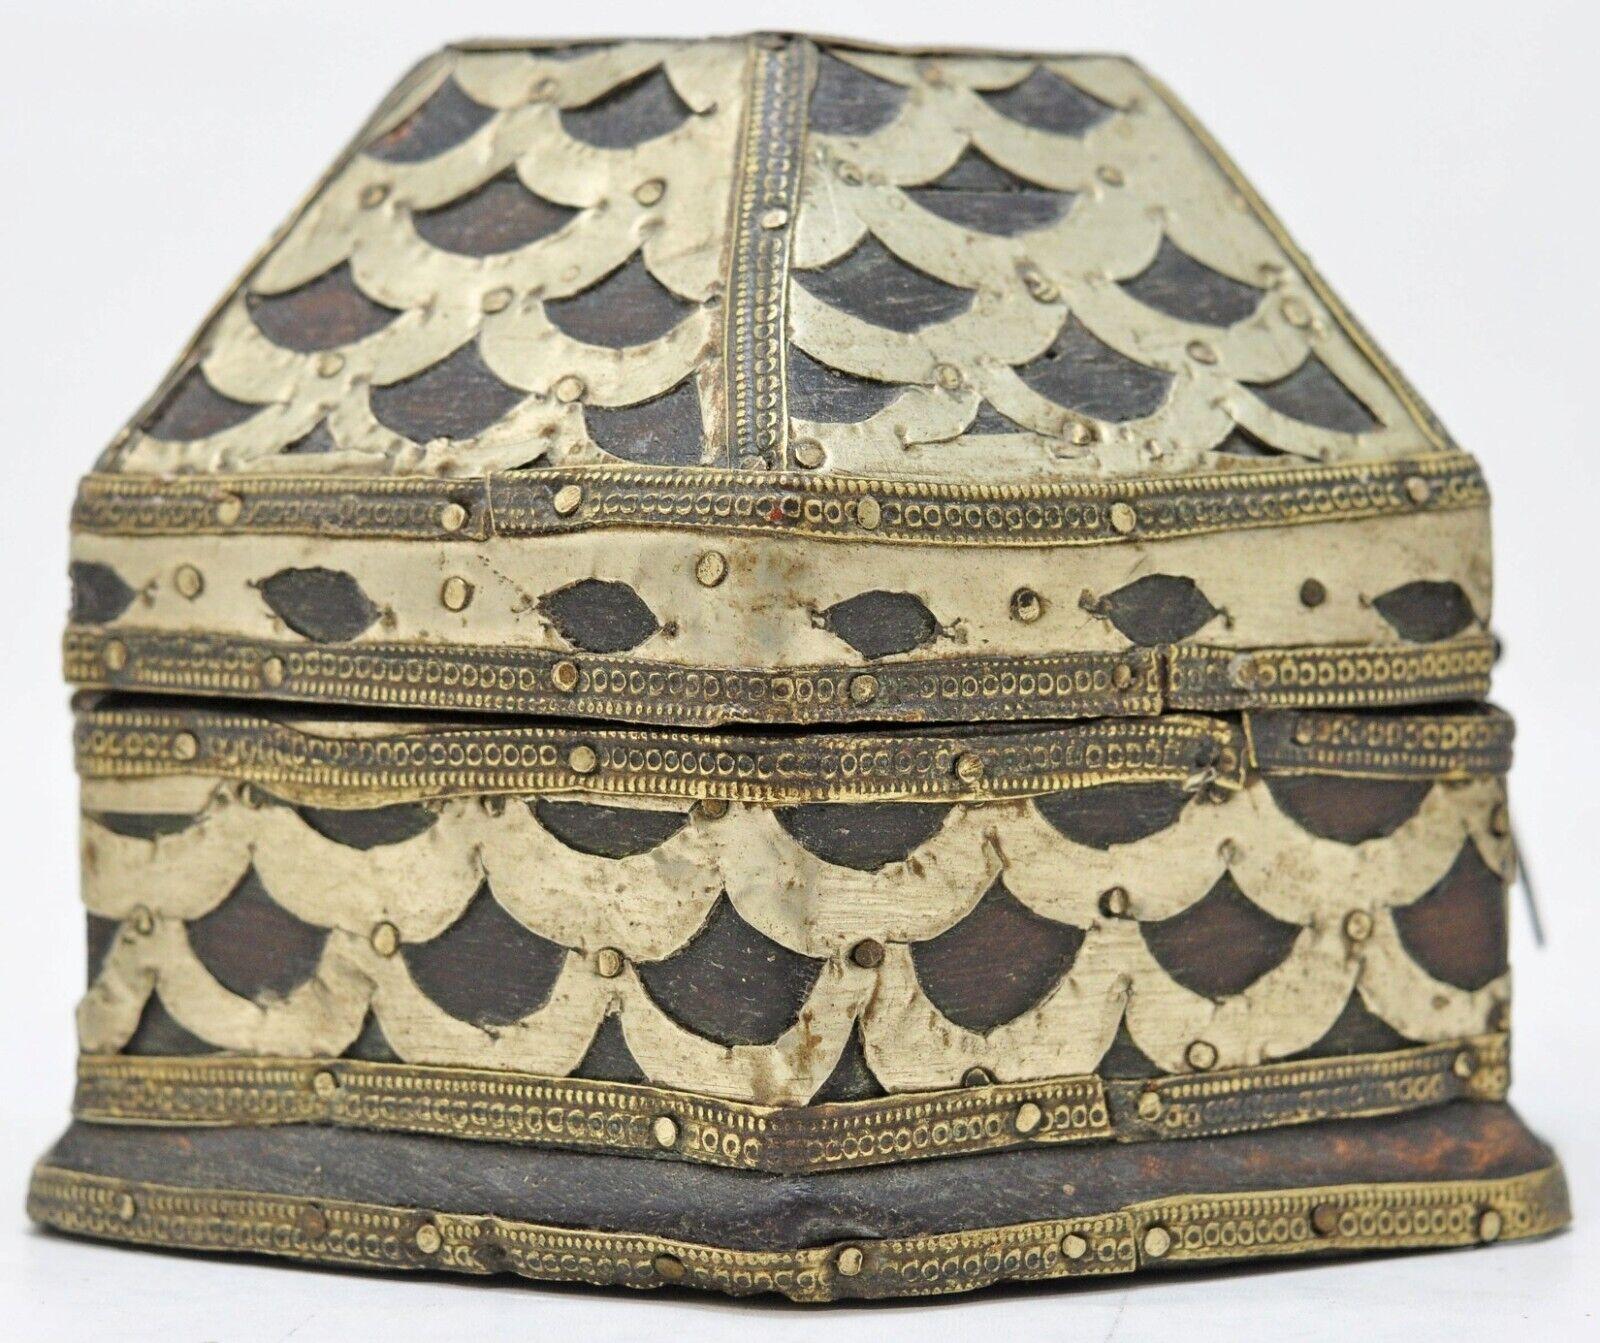 Hand-Crafted Small and elaborate Hand-Made Vintage Indian Decorative Trinket Box For Sale